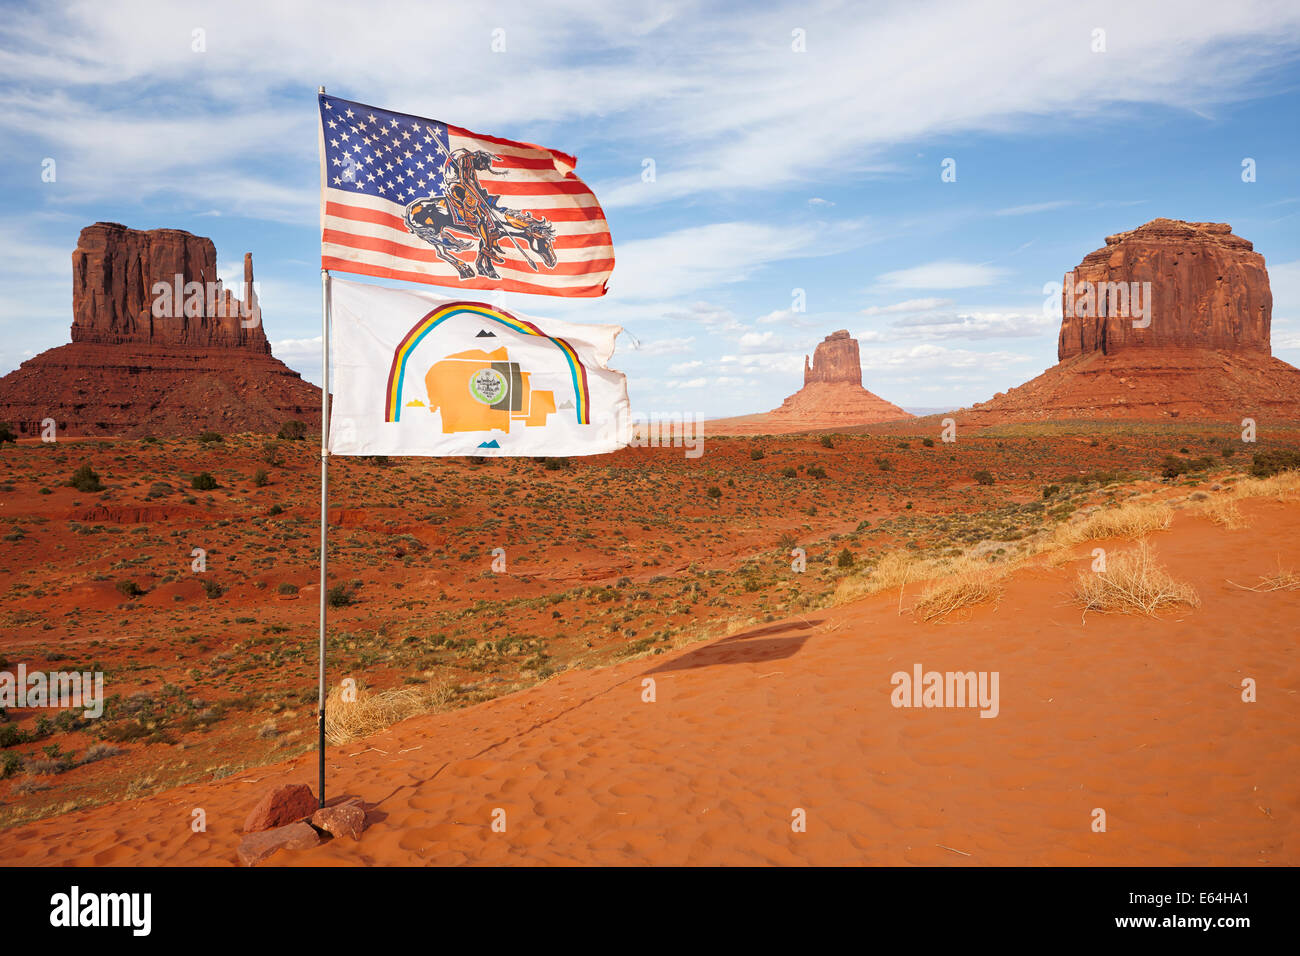 US flag and flag of the Navajo Nation flying together in Monument Valley Navajo Tribal Park. Arizona, USA. Stock Photo